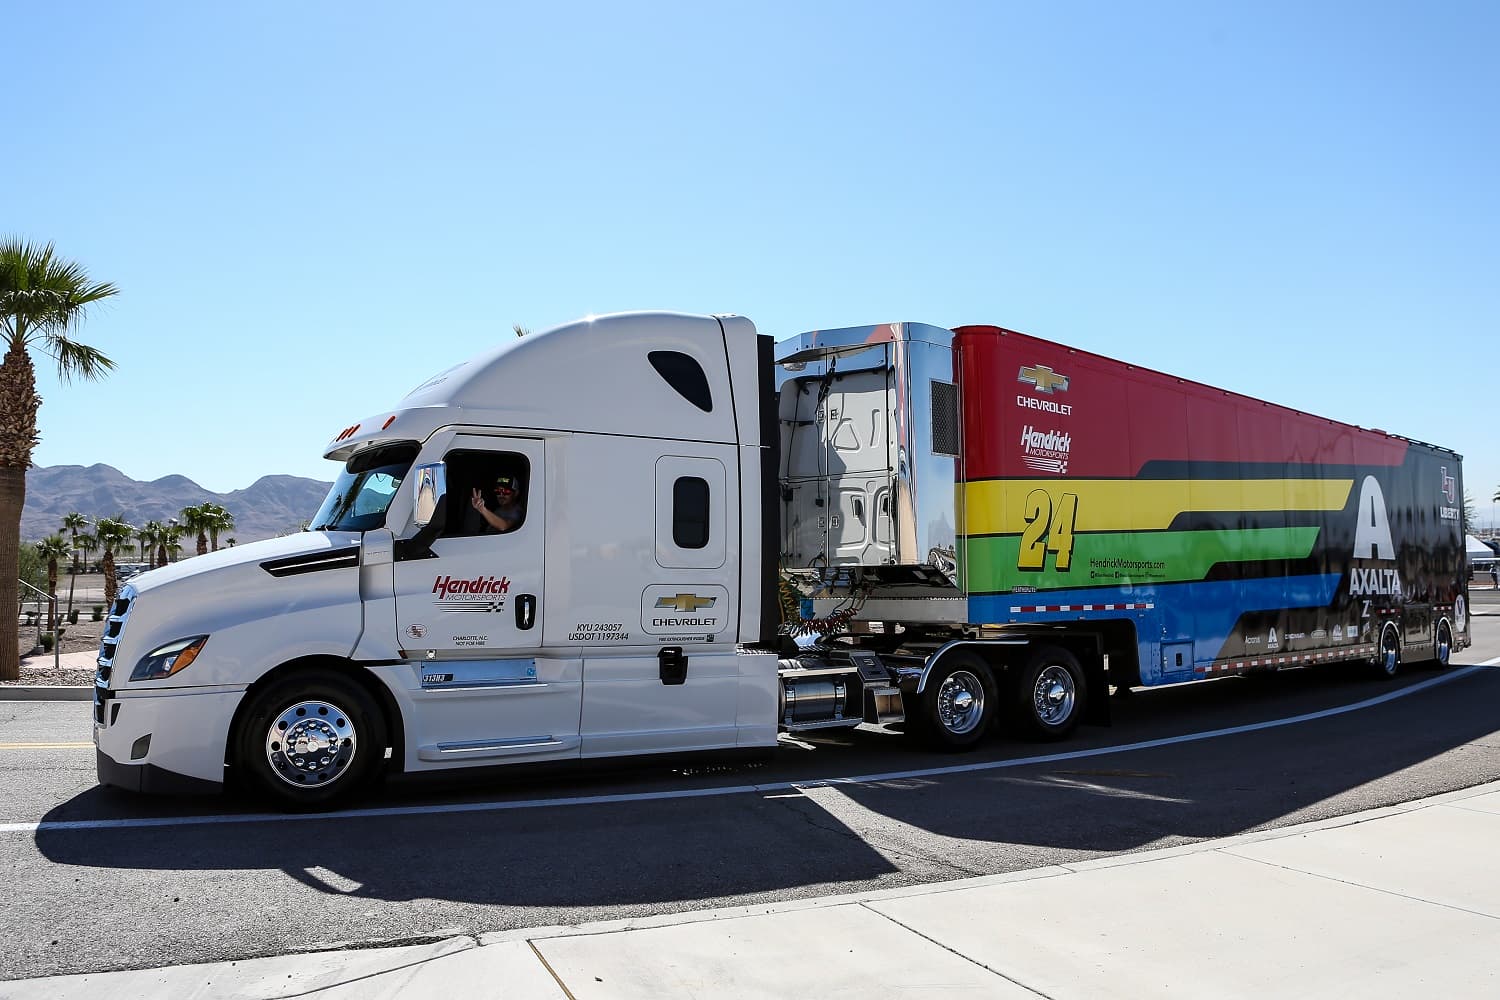 The hauler of Hendrick Motorsports driver William Byron on the move for the NASCAR Cup Series South Point 400 on Oct. 14, 2022.